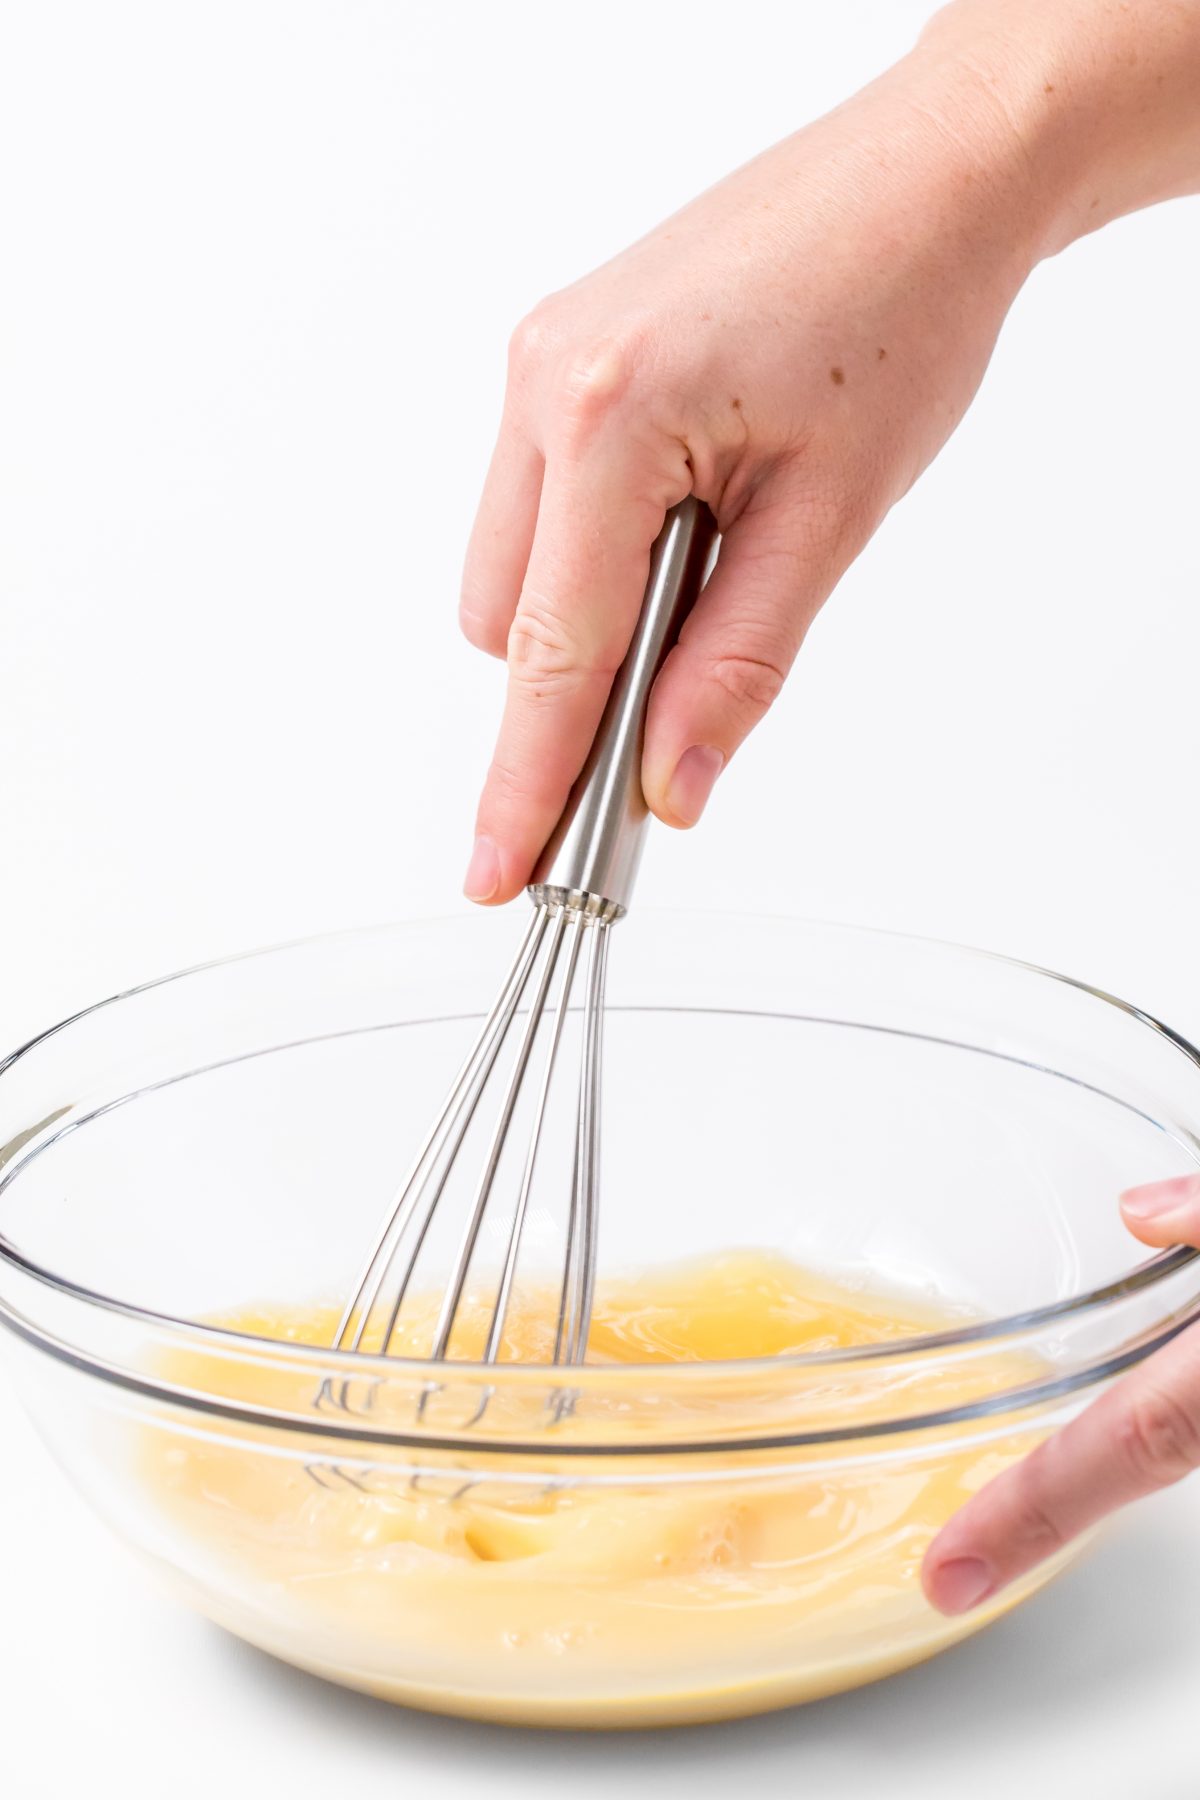 Whisk eggs and broth together